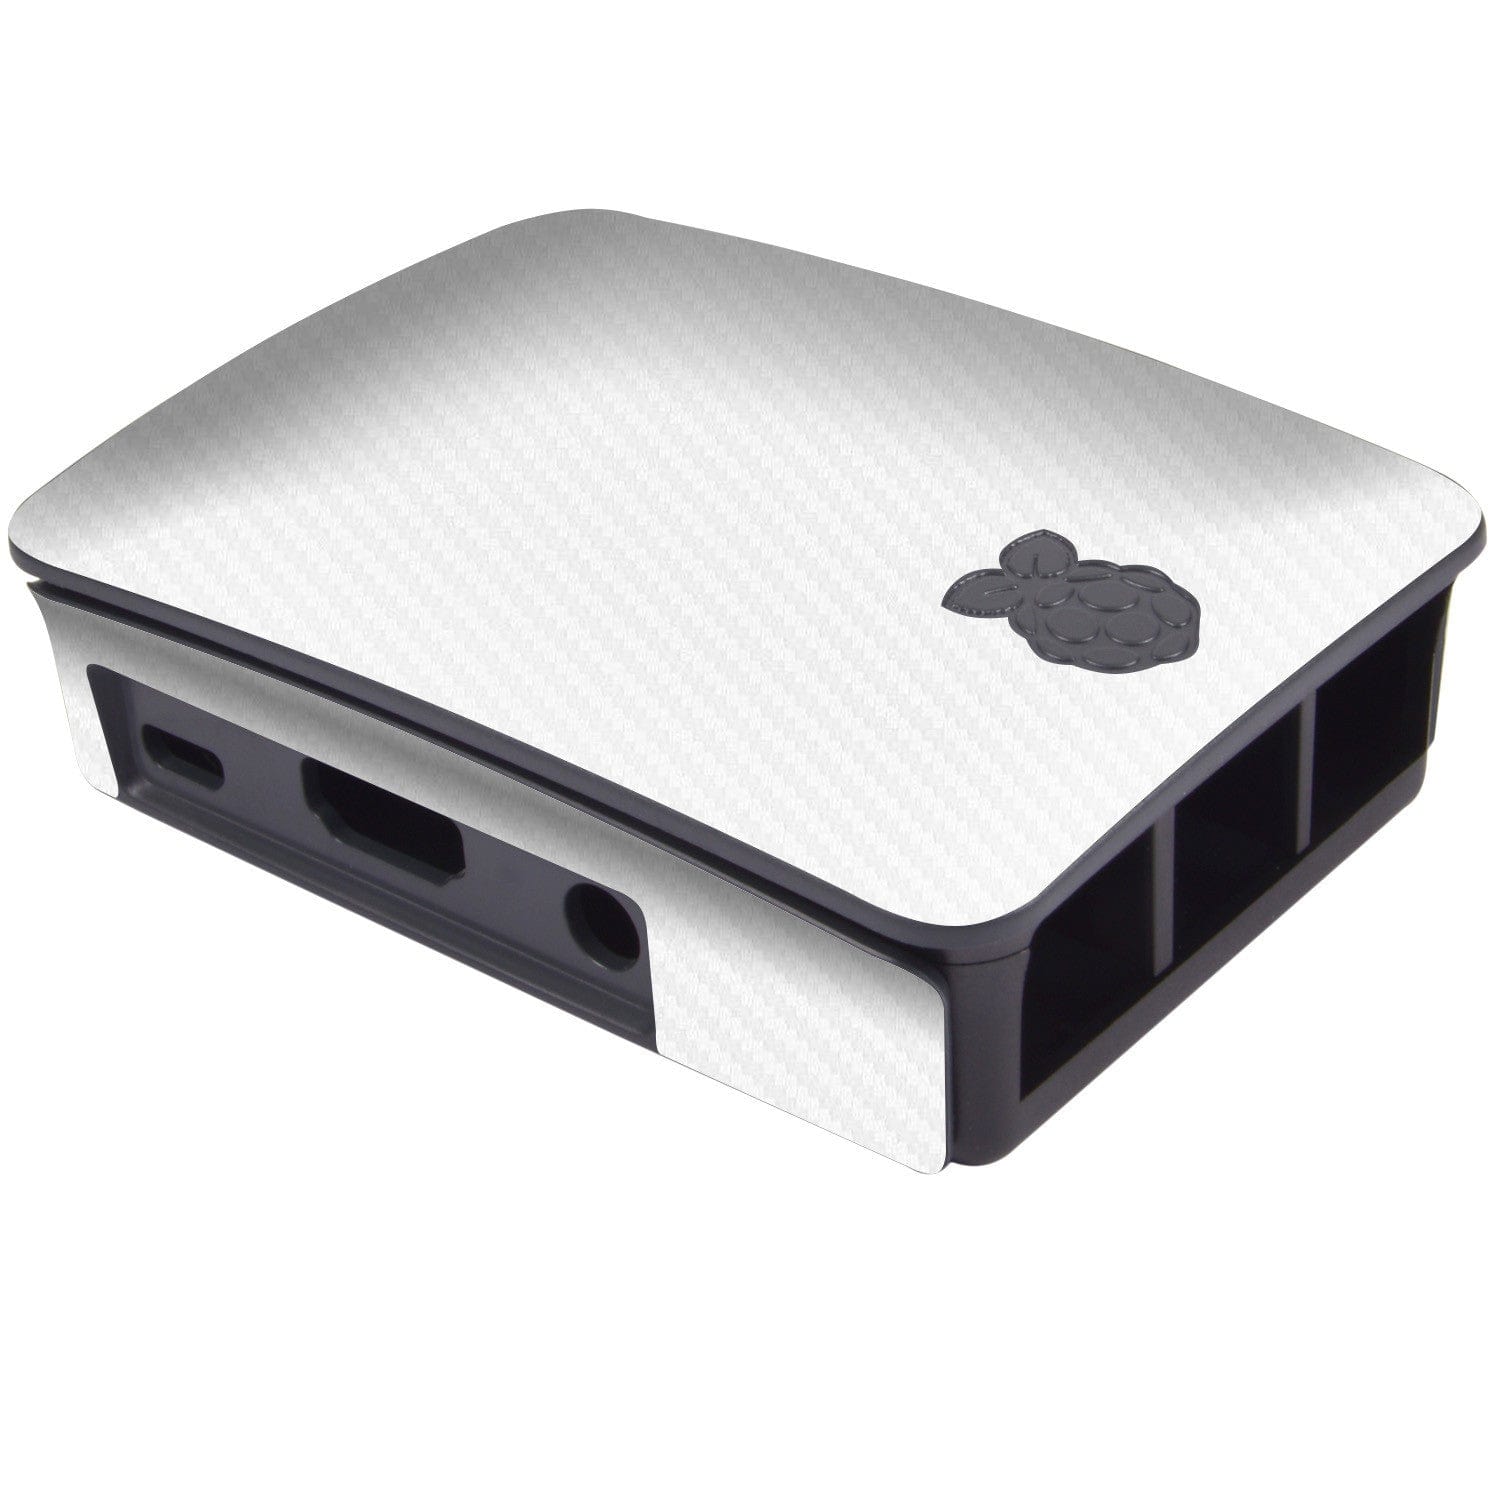 Case Skin for the Official Raspberry Pi 3 Case - The Pi Hut